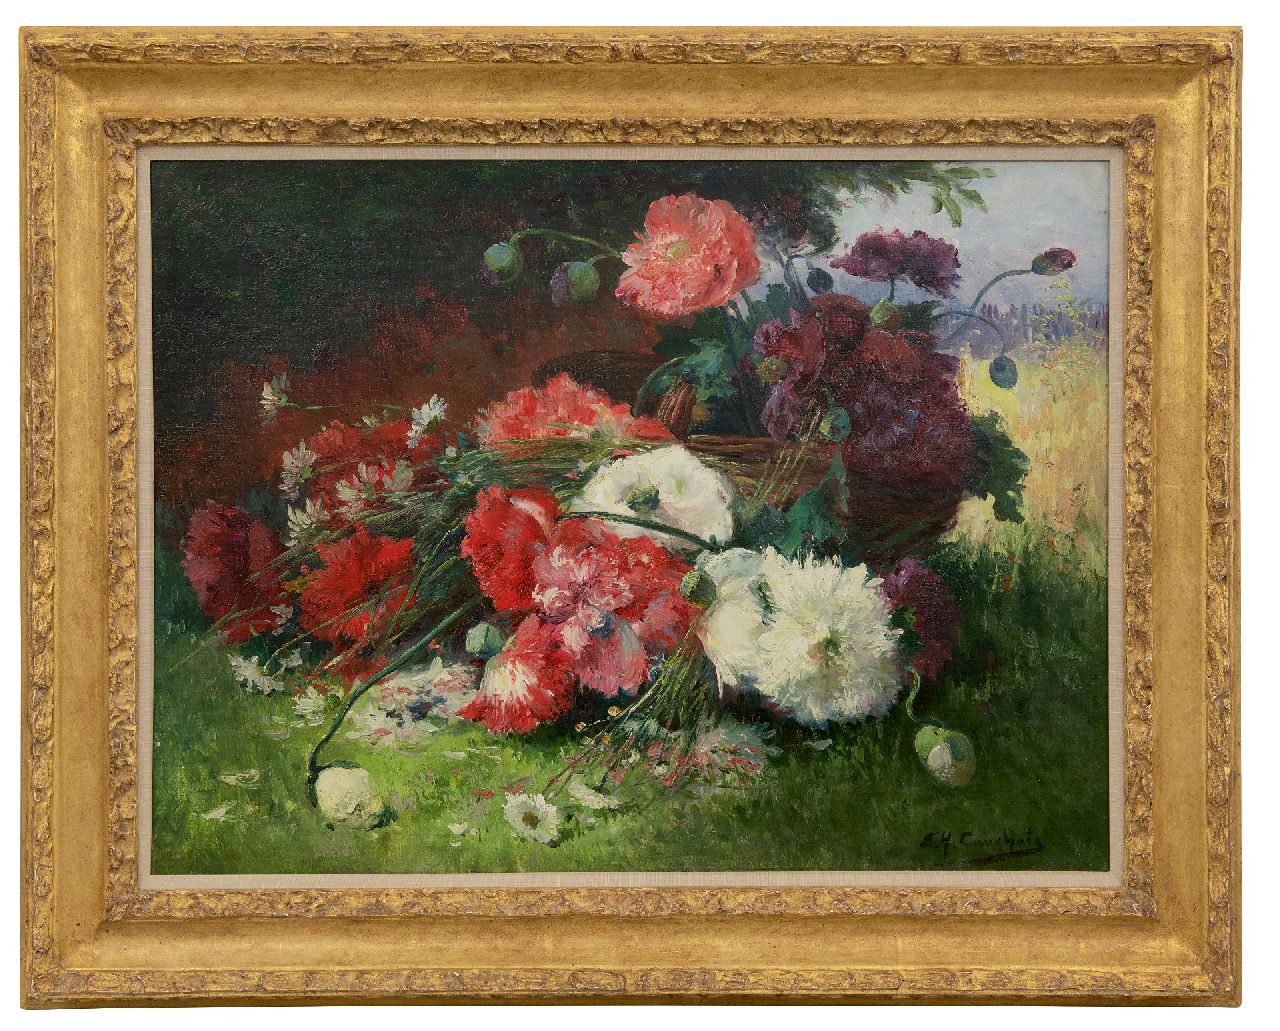 Cauchois E.H.  | Eugène-Henri Cauchois | Paintings offered for sale | A flower still life with poppies and daisies, oil on canvas 60.4 x 81.3 cm, signed l.r.